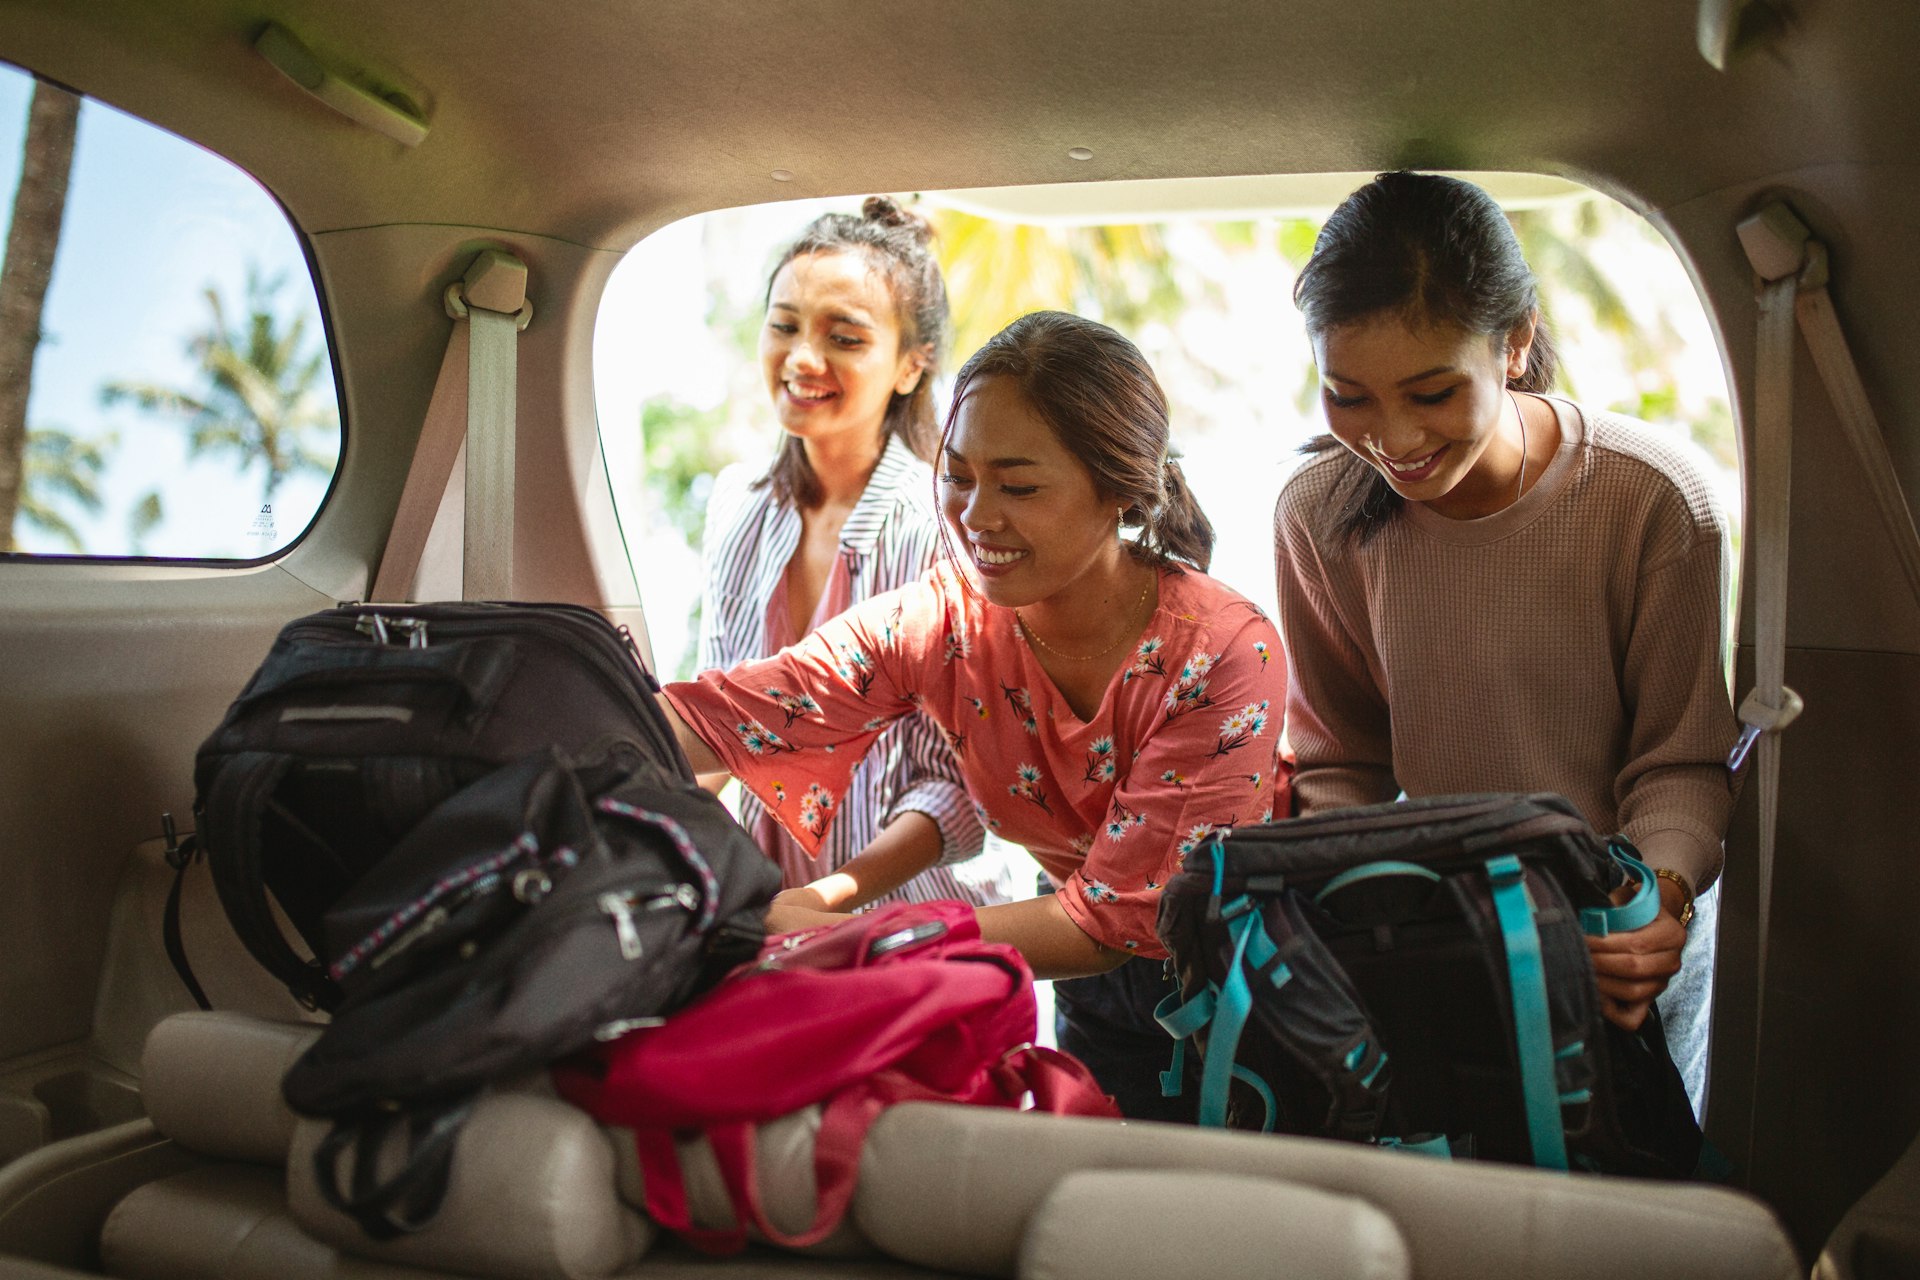 Three women put backpacks in the trunk of a car